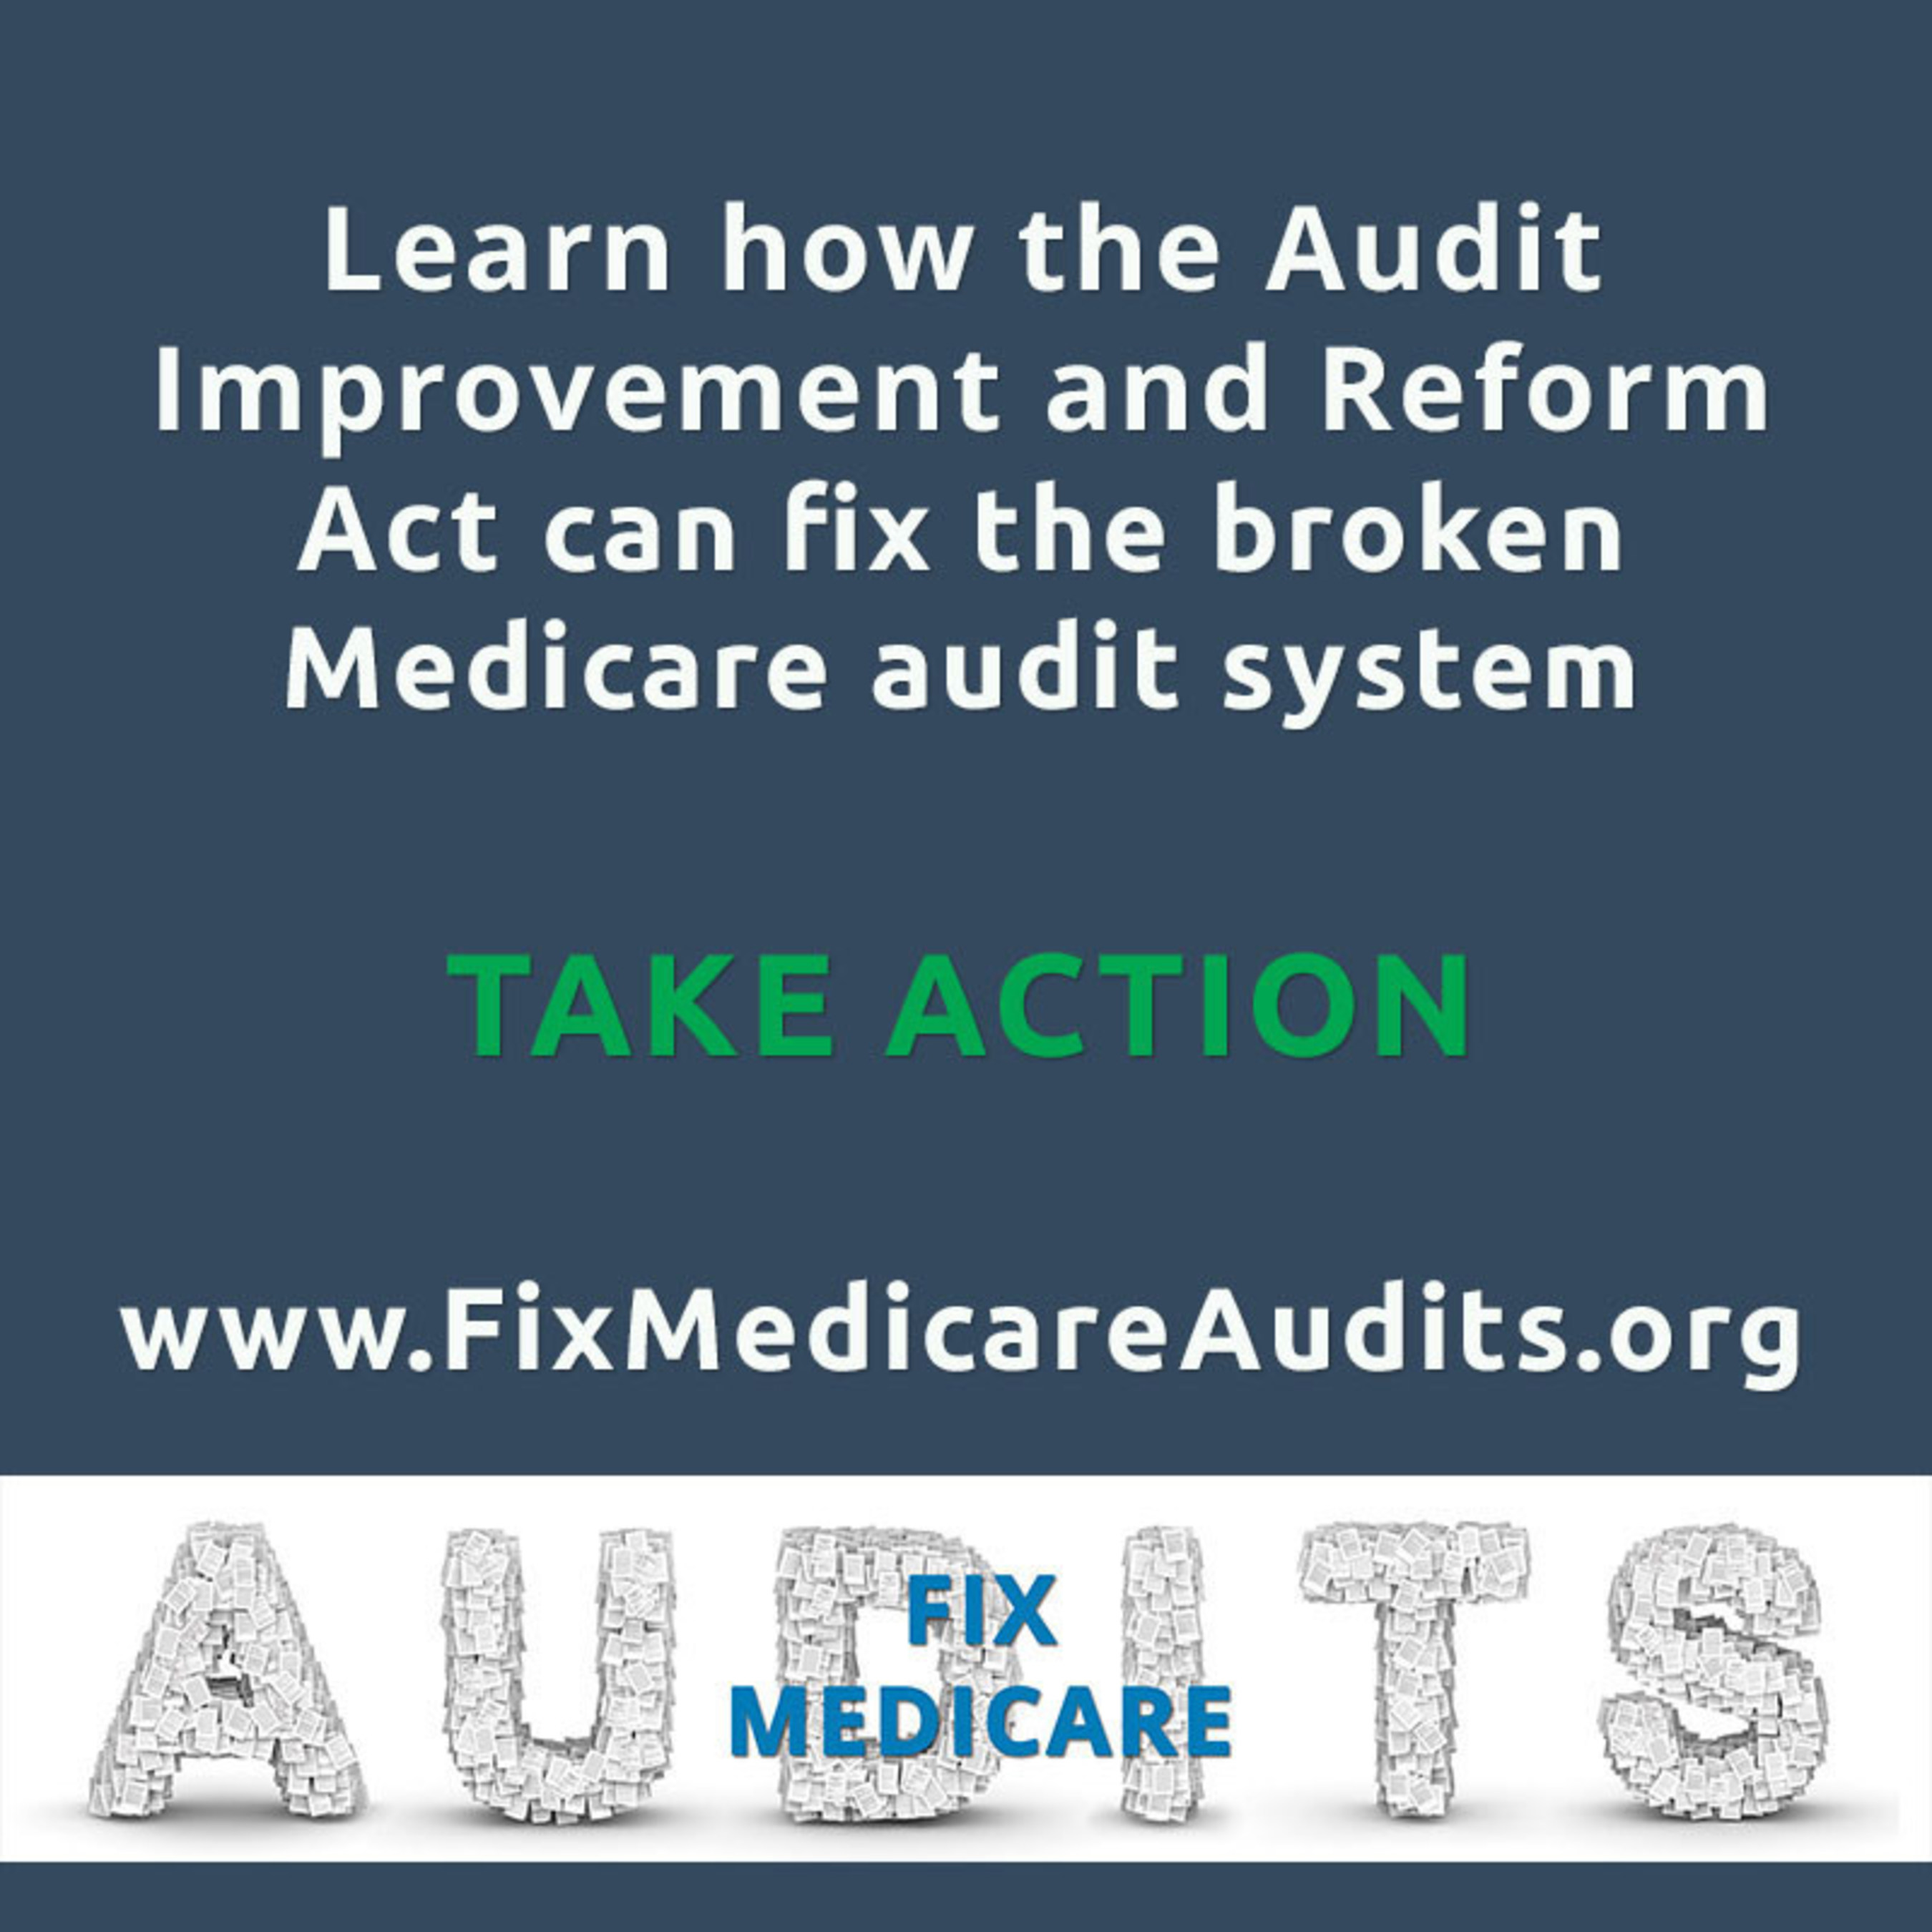 The American Association for Homecare (AAHomecare) is proud to announce the introduction of a new piece of legislation to fix the broken Medicare audit system. The Audit Improvement and Reform Act (AIR Act), sponsored by Reps. Renee Ellmers (R-N.C.) and John Barrow (D-Ga.), will increase transparency, education and outreach, and reward suppliers that have low error rates on audited claims. (PRNewsFoto/American Association for Home...)